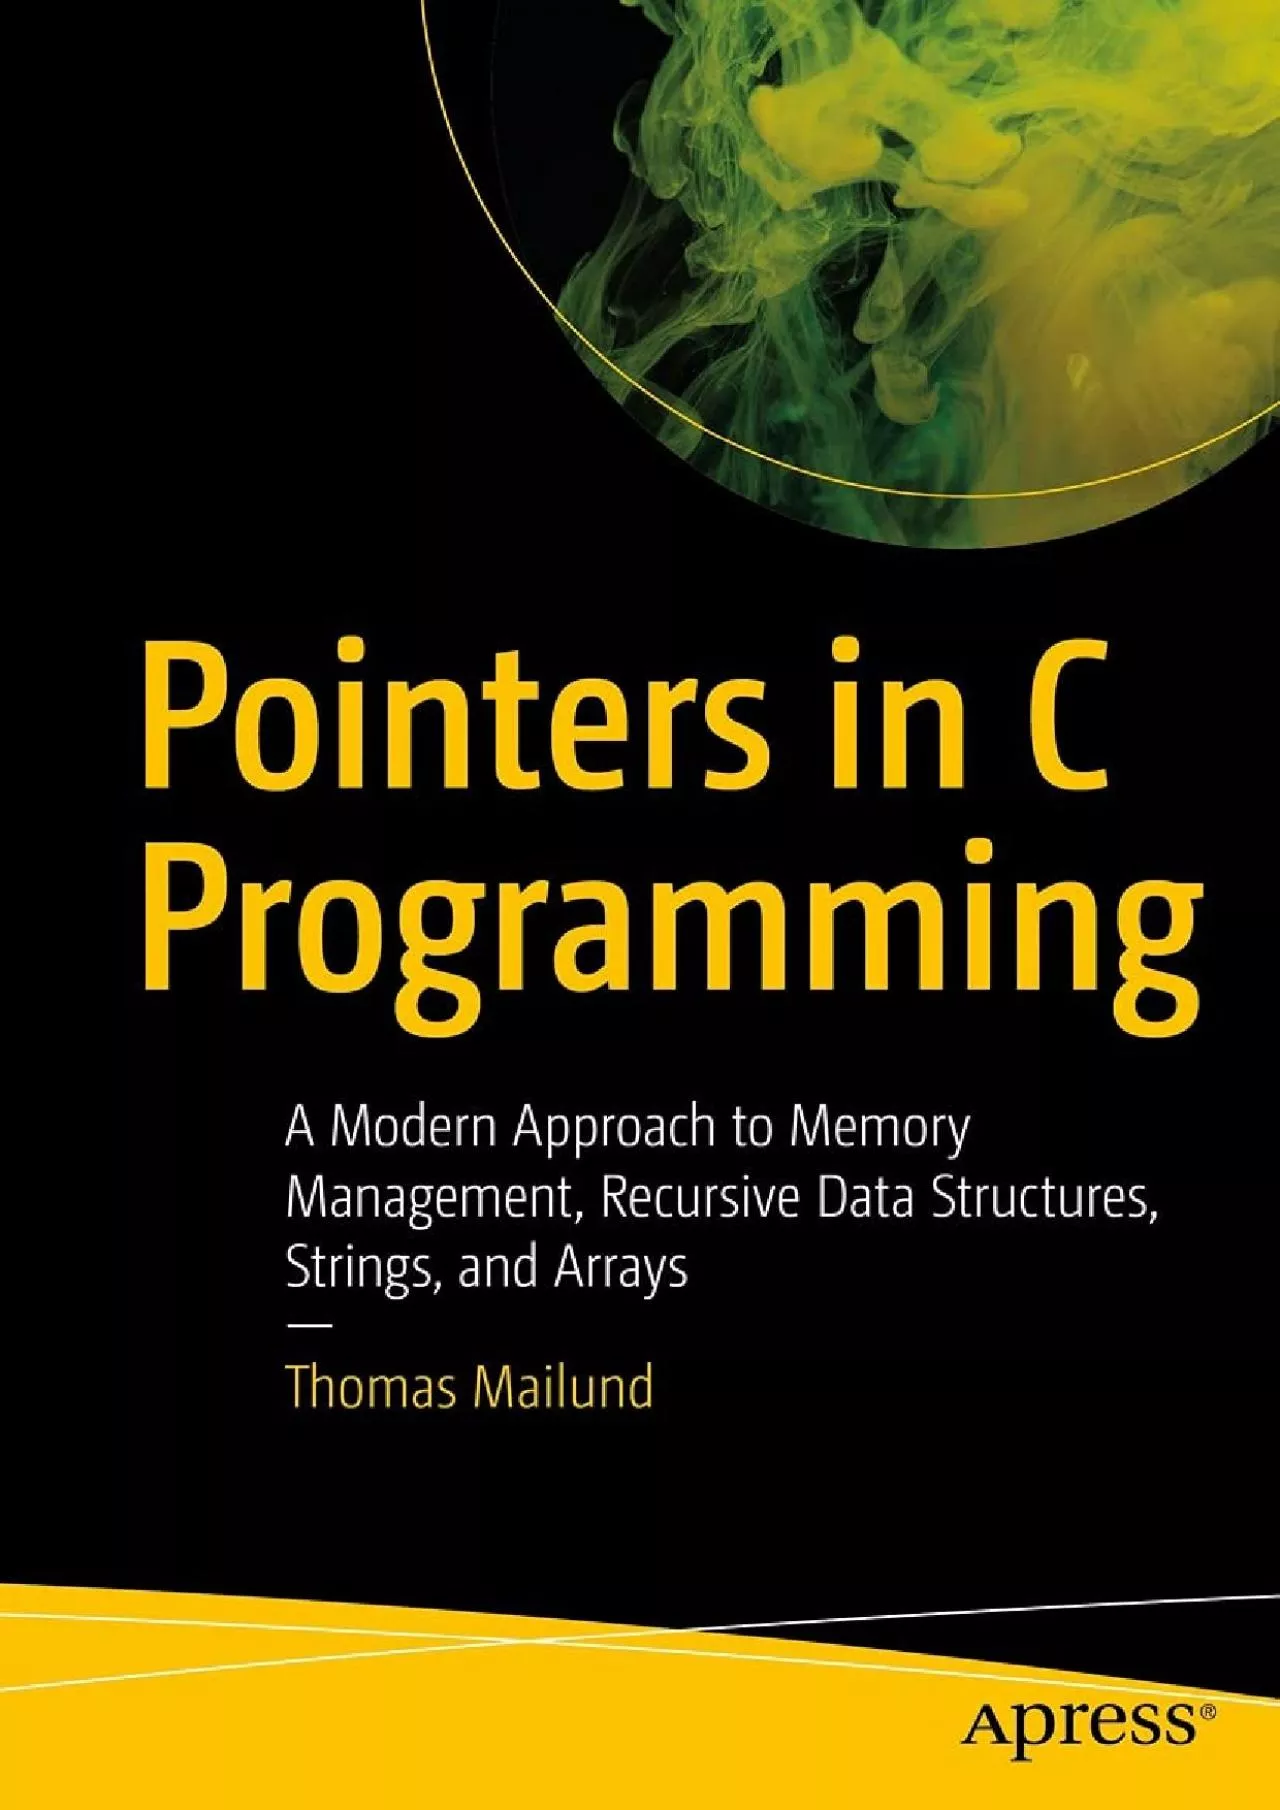 [BEST]-Pointers in C Programming: A Modern Approach to Memory Management, Recursive Data